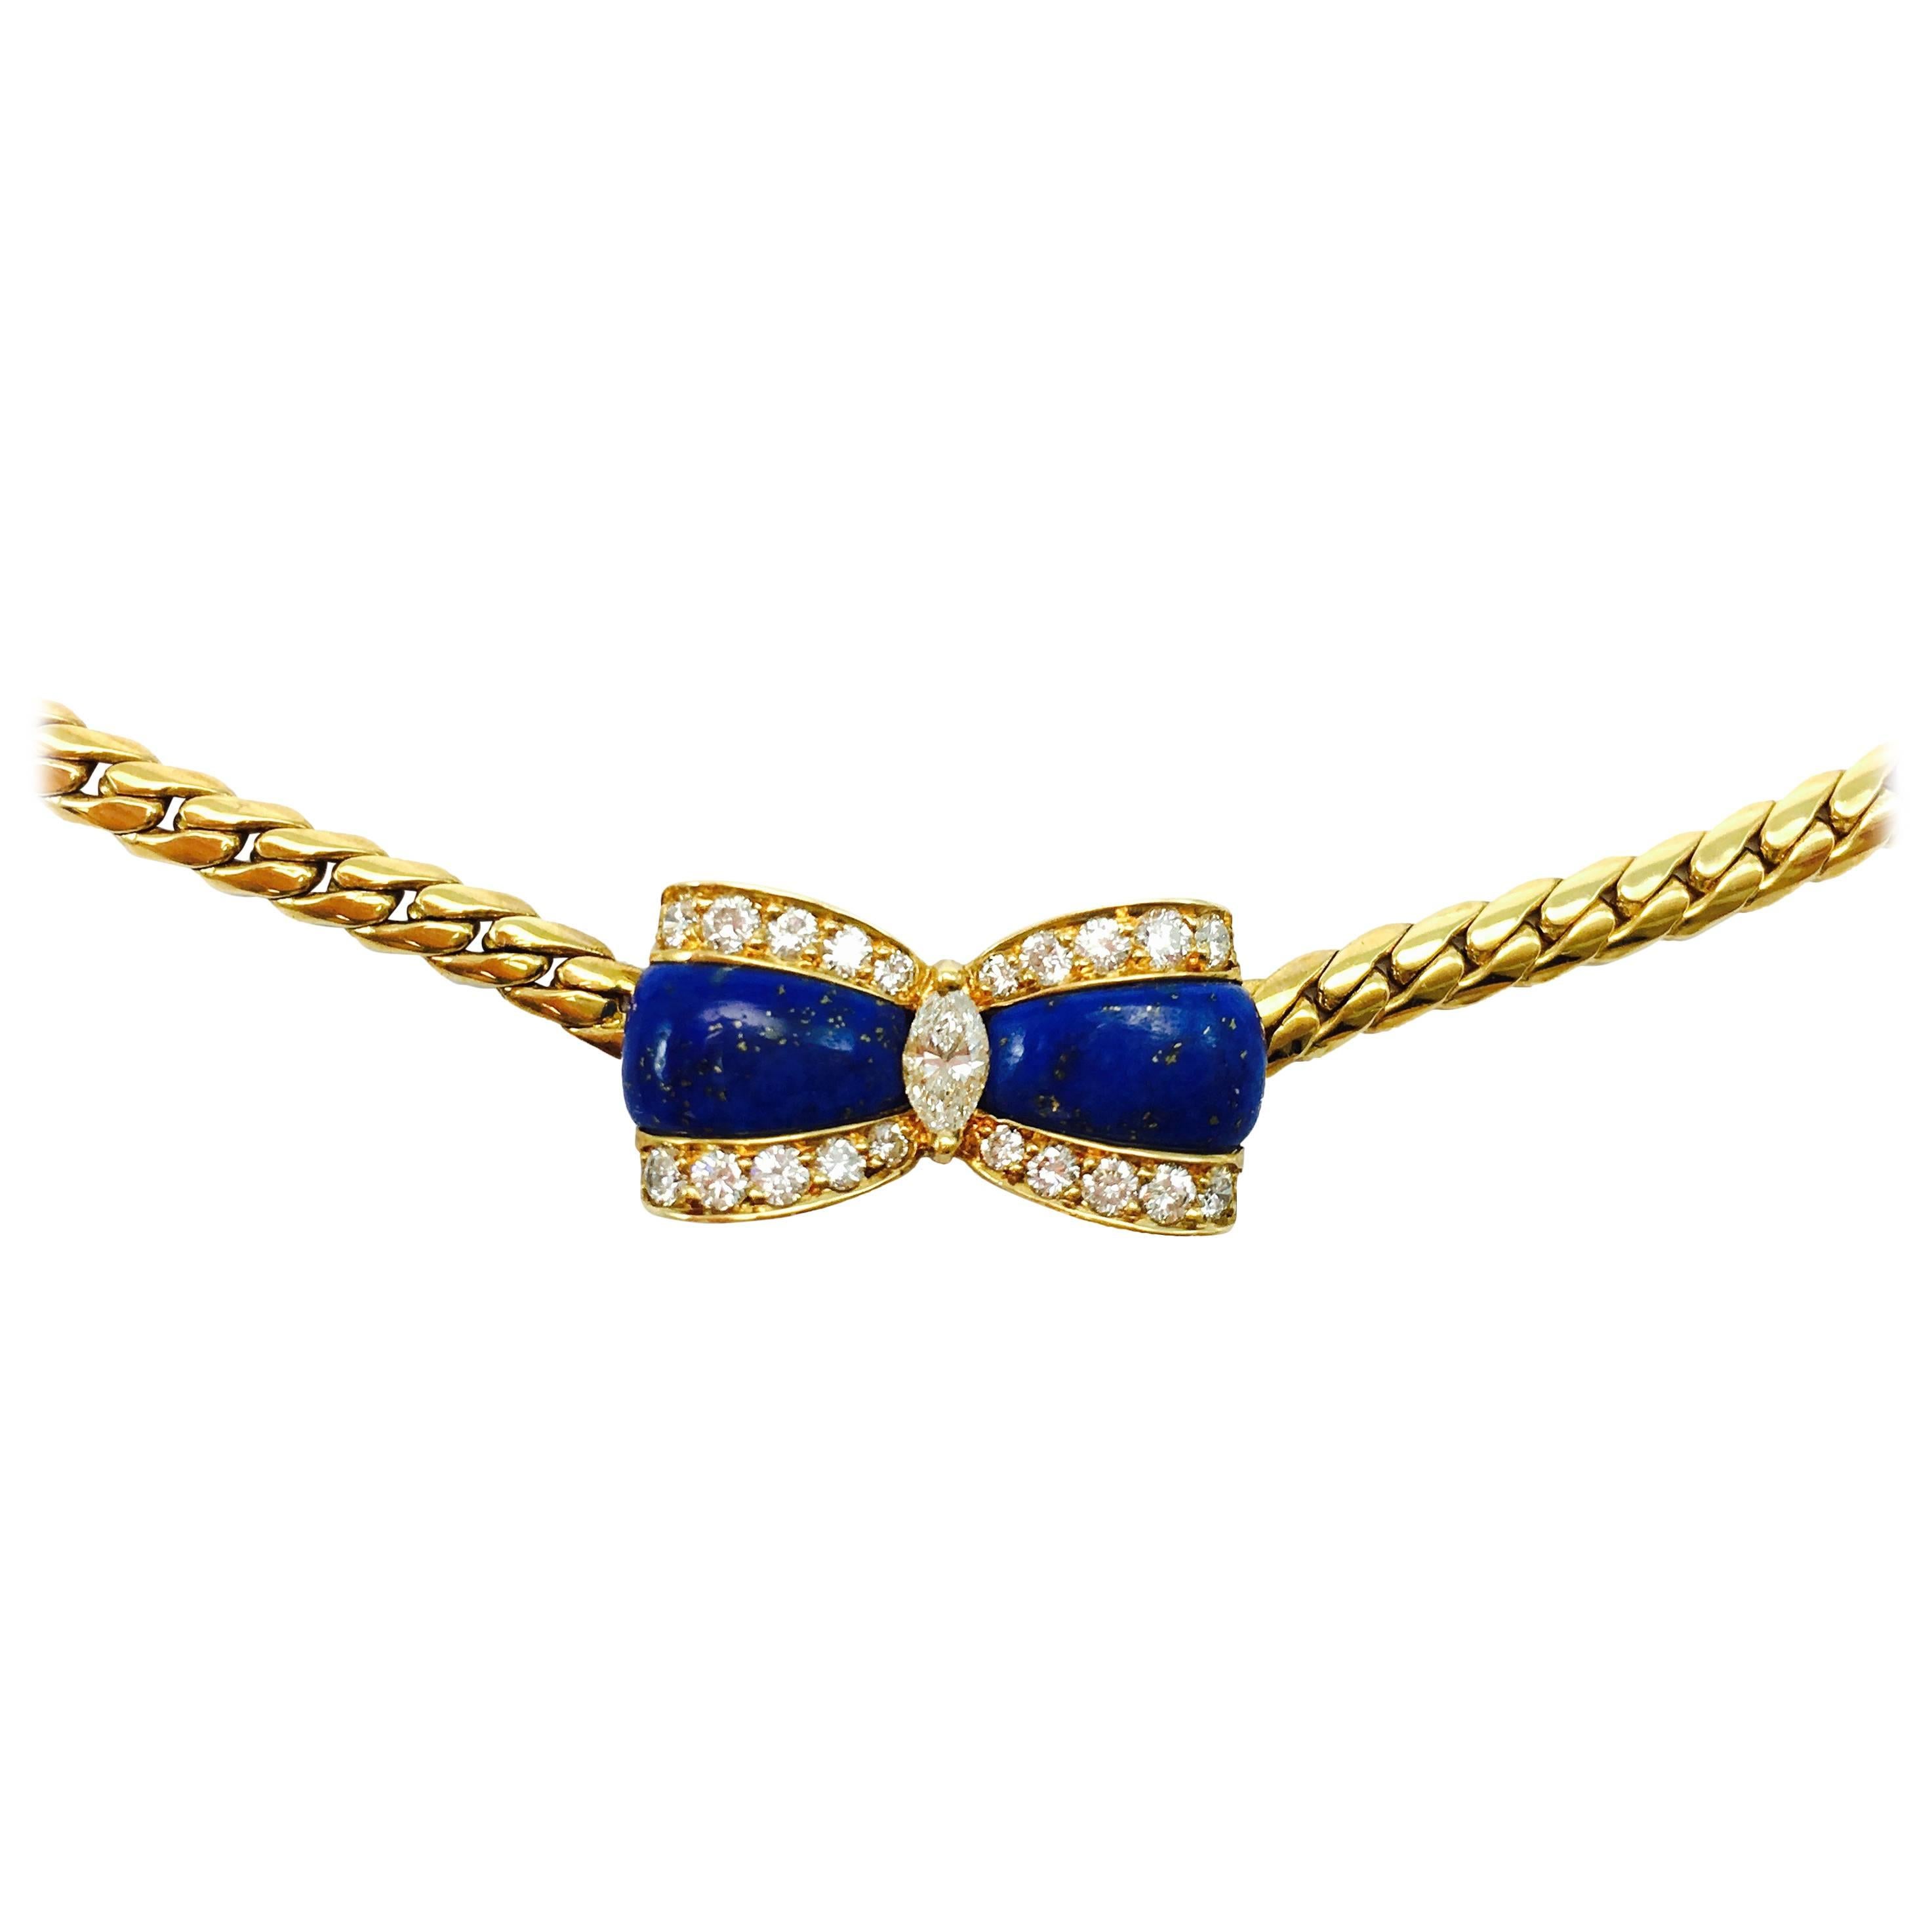 Rare 18K yellow gold necklace, featuring a curved lapis lazuli bow set with one marquise cut diamond in the center and twenty round brilliant cut diamonds. Approximate total diamond weight: 0.75 ct. Color: F-G, Clarity: VS
The bow measures: 22.5 mm